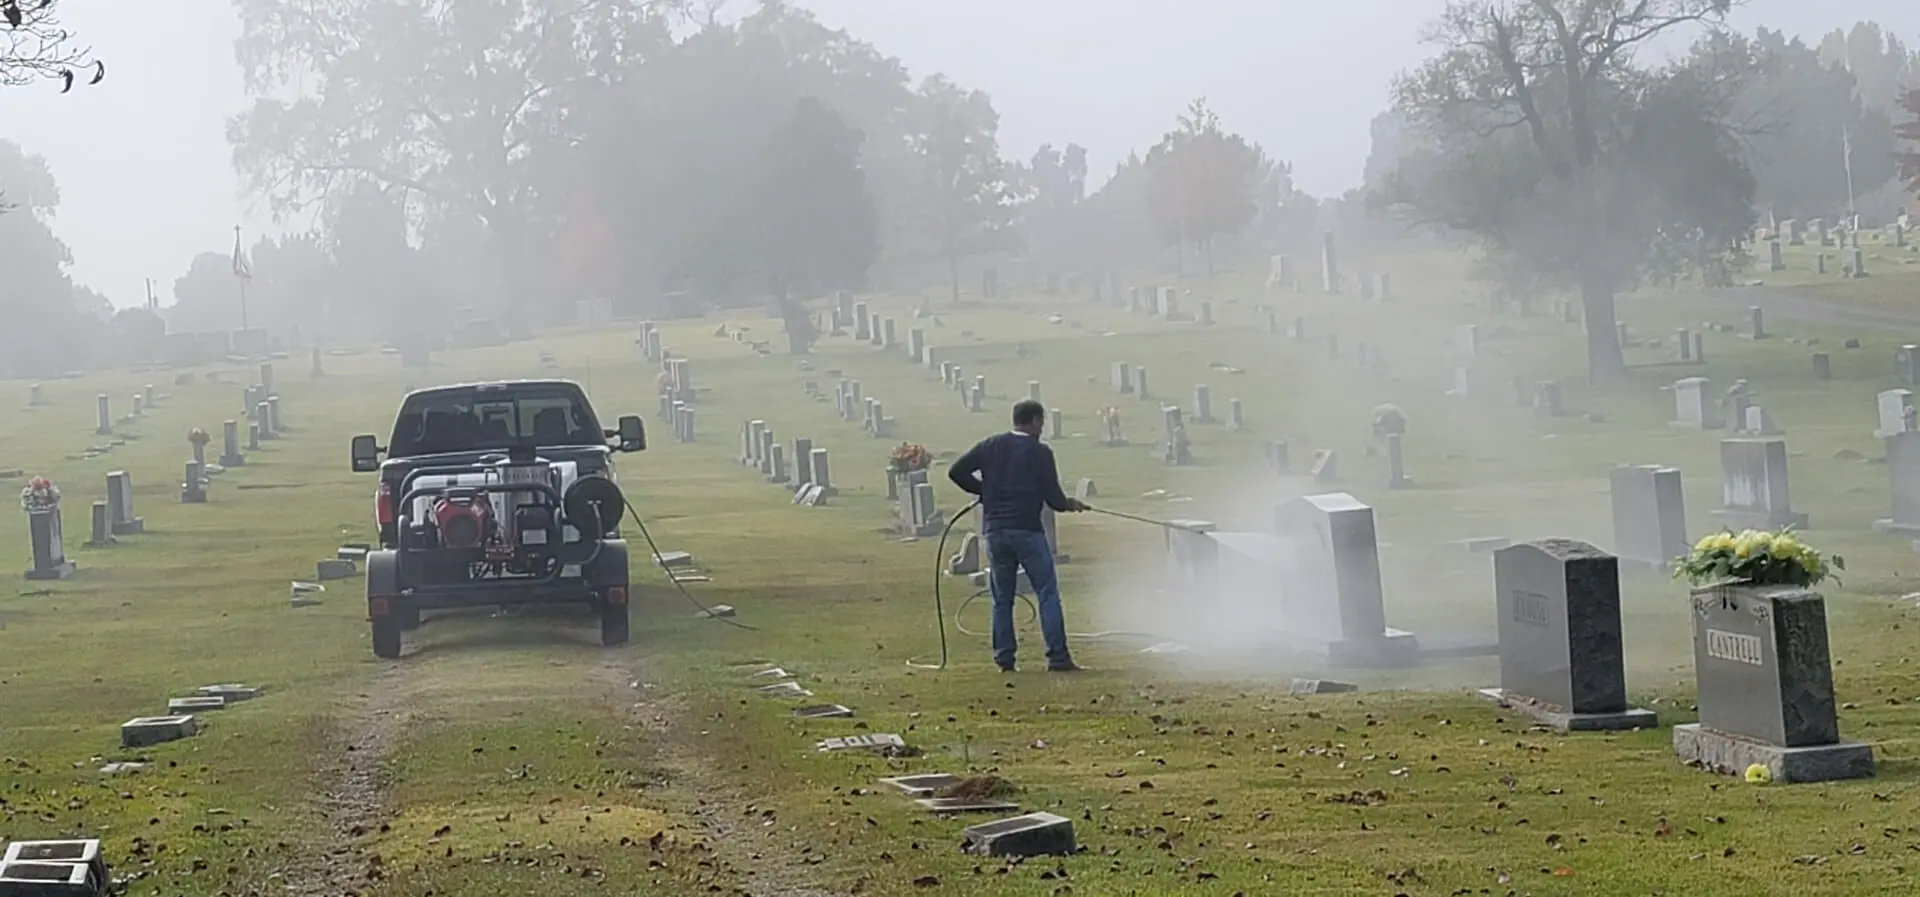 A Man Cleaning Tombstones in a Line